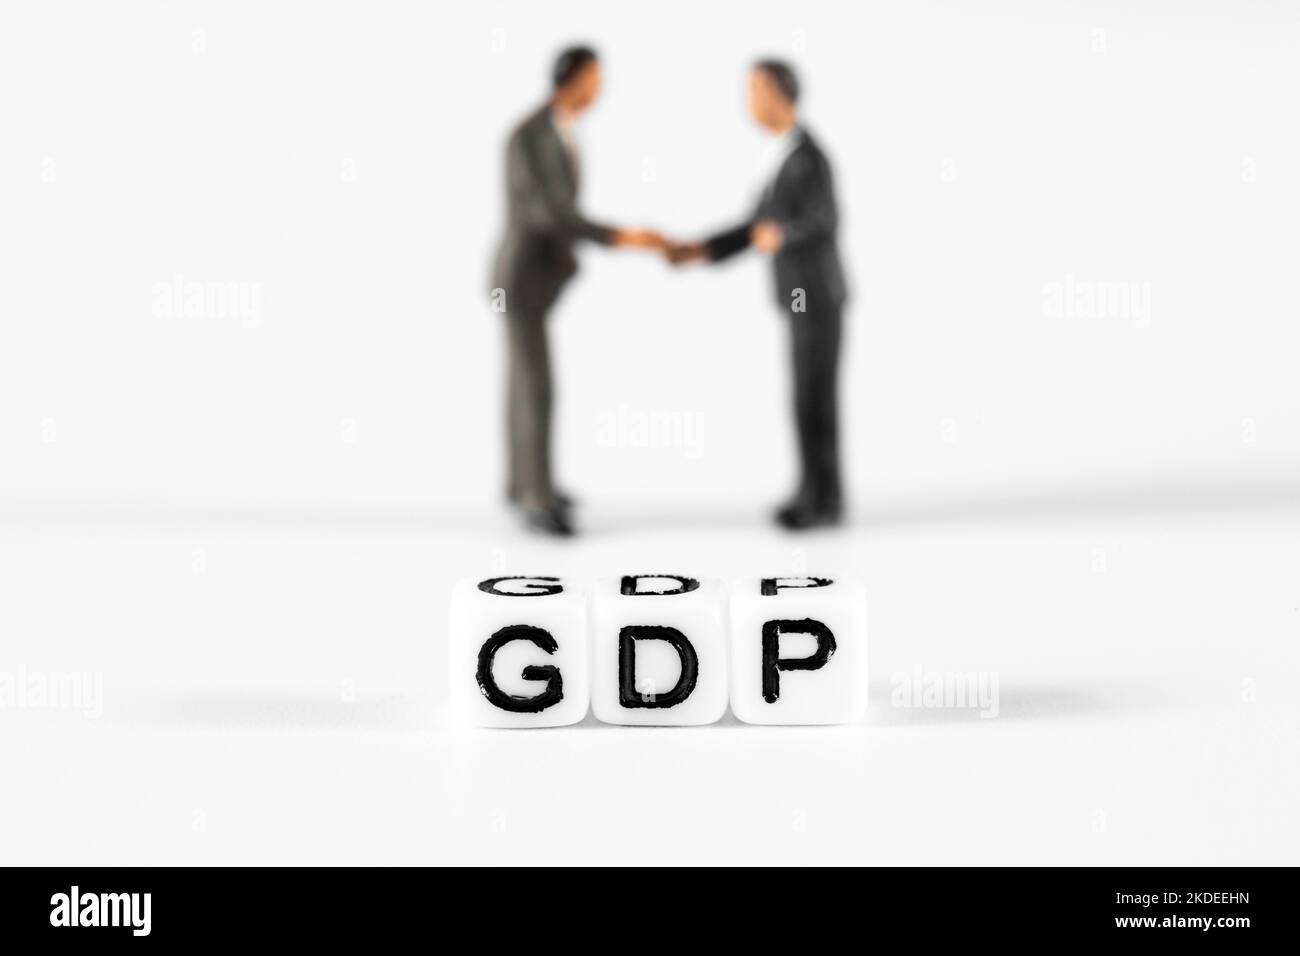 GDP on beads with two scale model businessmen, shaking hands, in the background. Britain cost of living crisis concept Stock Photo